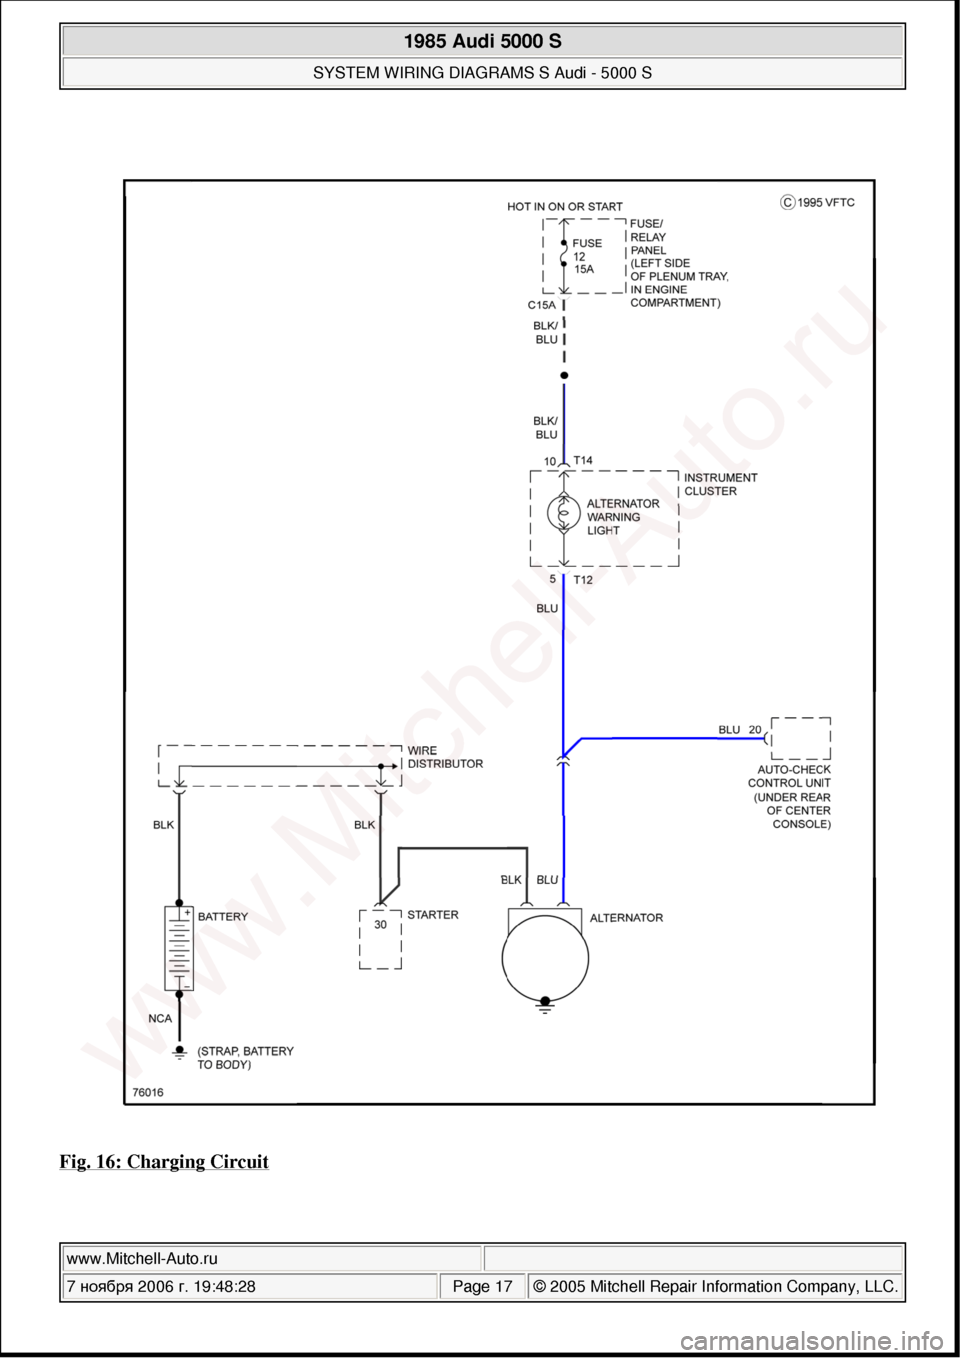 AUDI 5000S 1985 C2 System Wiring Diagram 
Fig. 16: Charging Circuit 
 
1985 Audi 5000 S 
SYSTEM WIRING DIAGRAMS S Audi - 5000 S  
www.Mitchell-Auto.ru  
7 ноября  2006 г. 19:48:28Page 17 © 2005 Mitchell Repair Information Company, LL